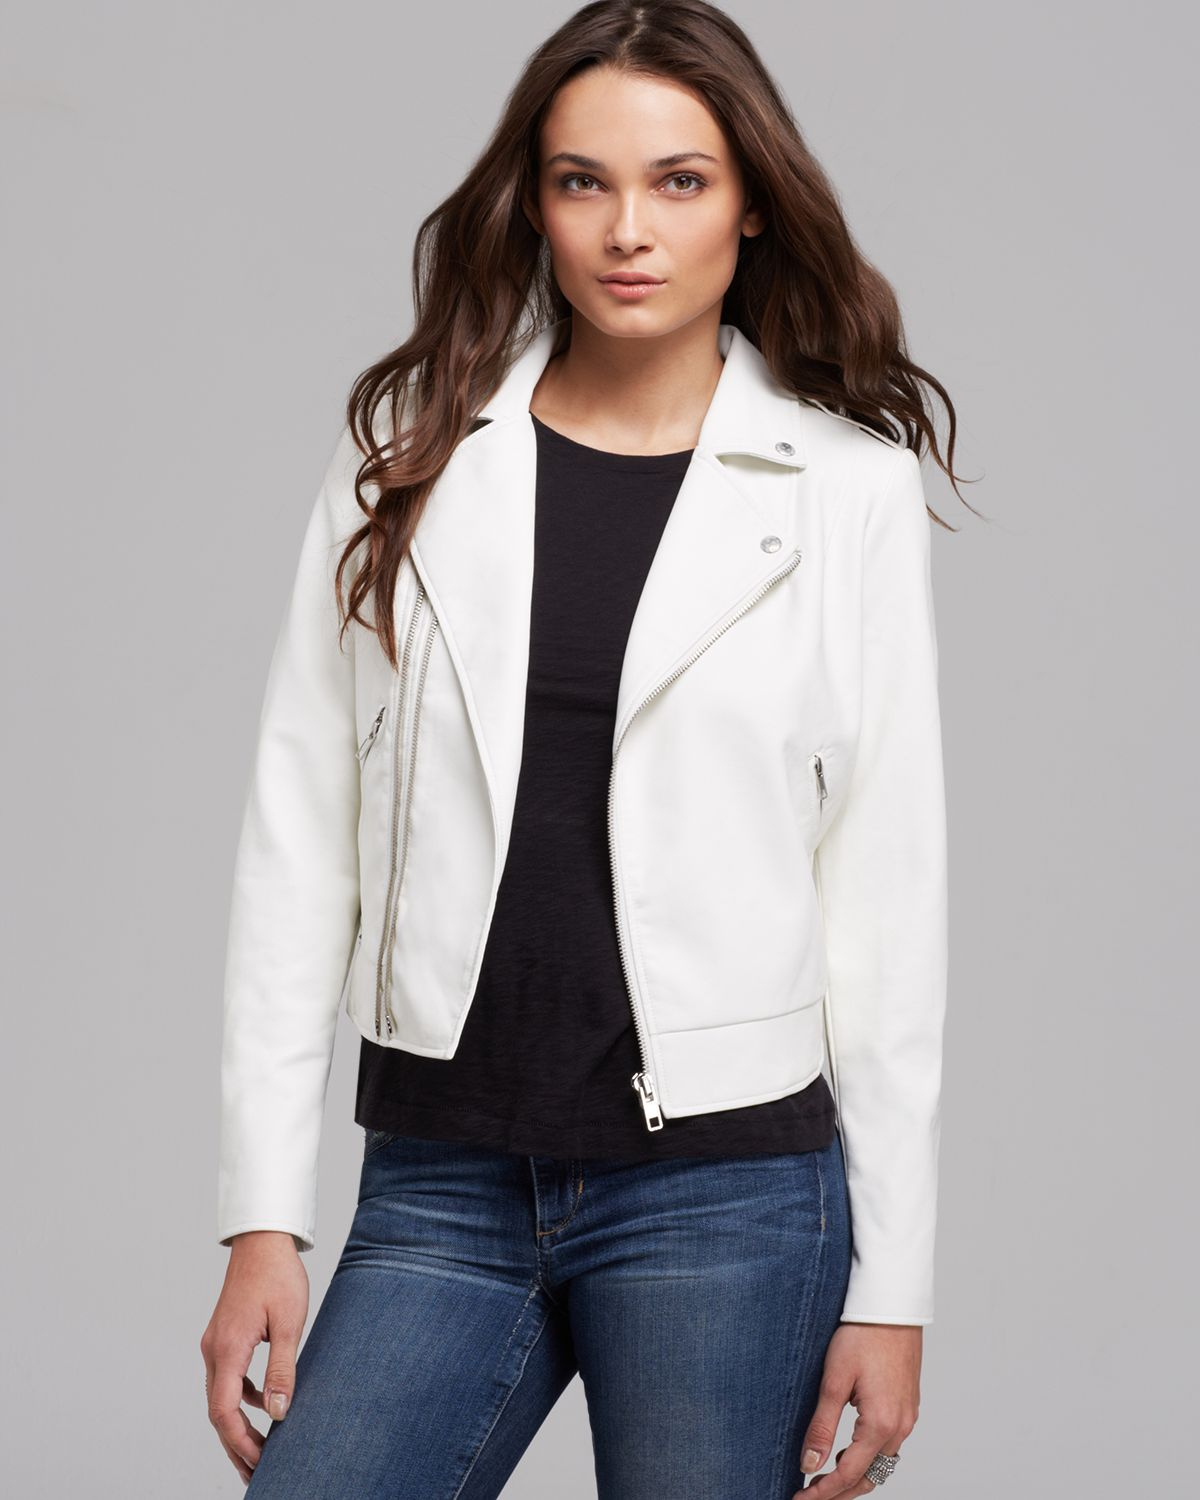 Lyst Guess Jacket Faux Leather Moto Crop in White